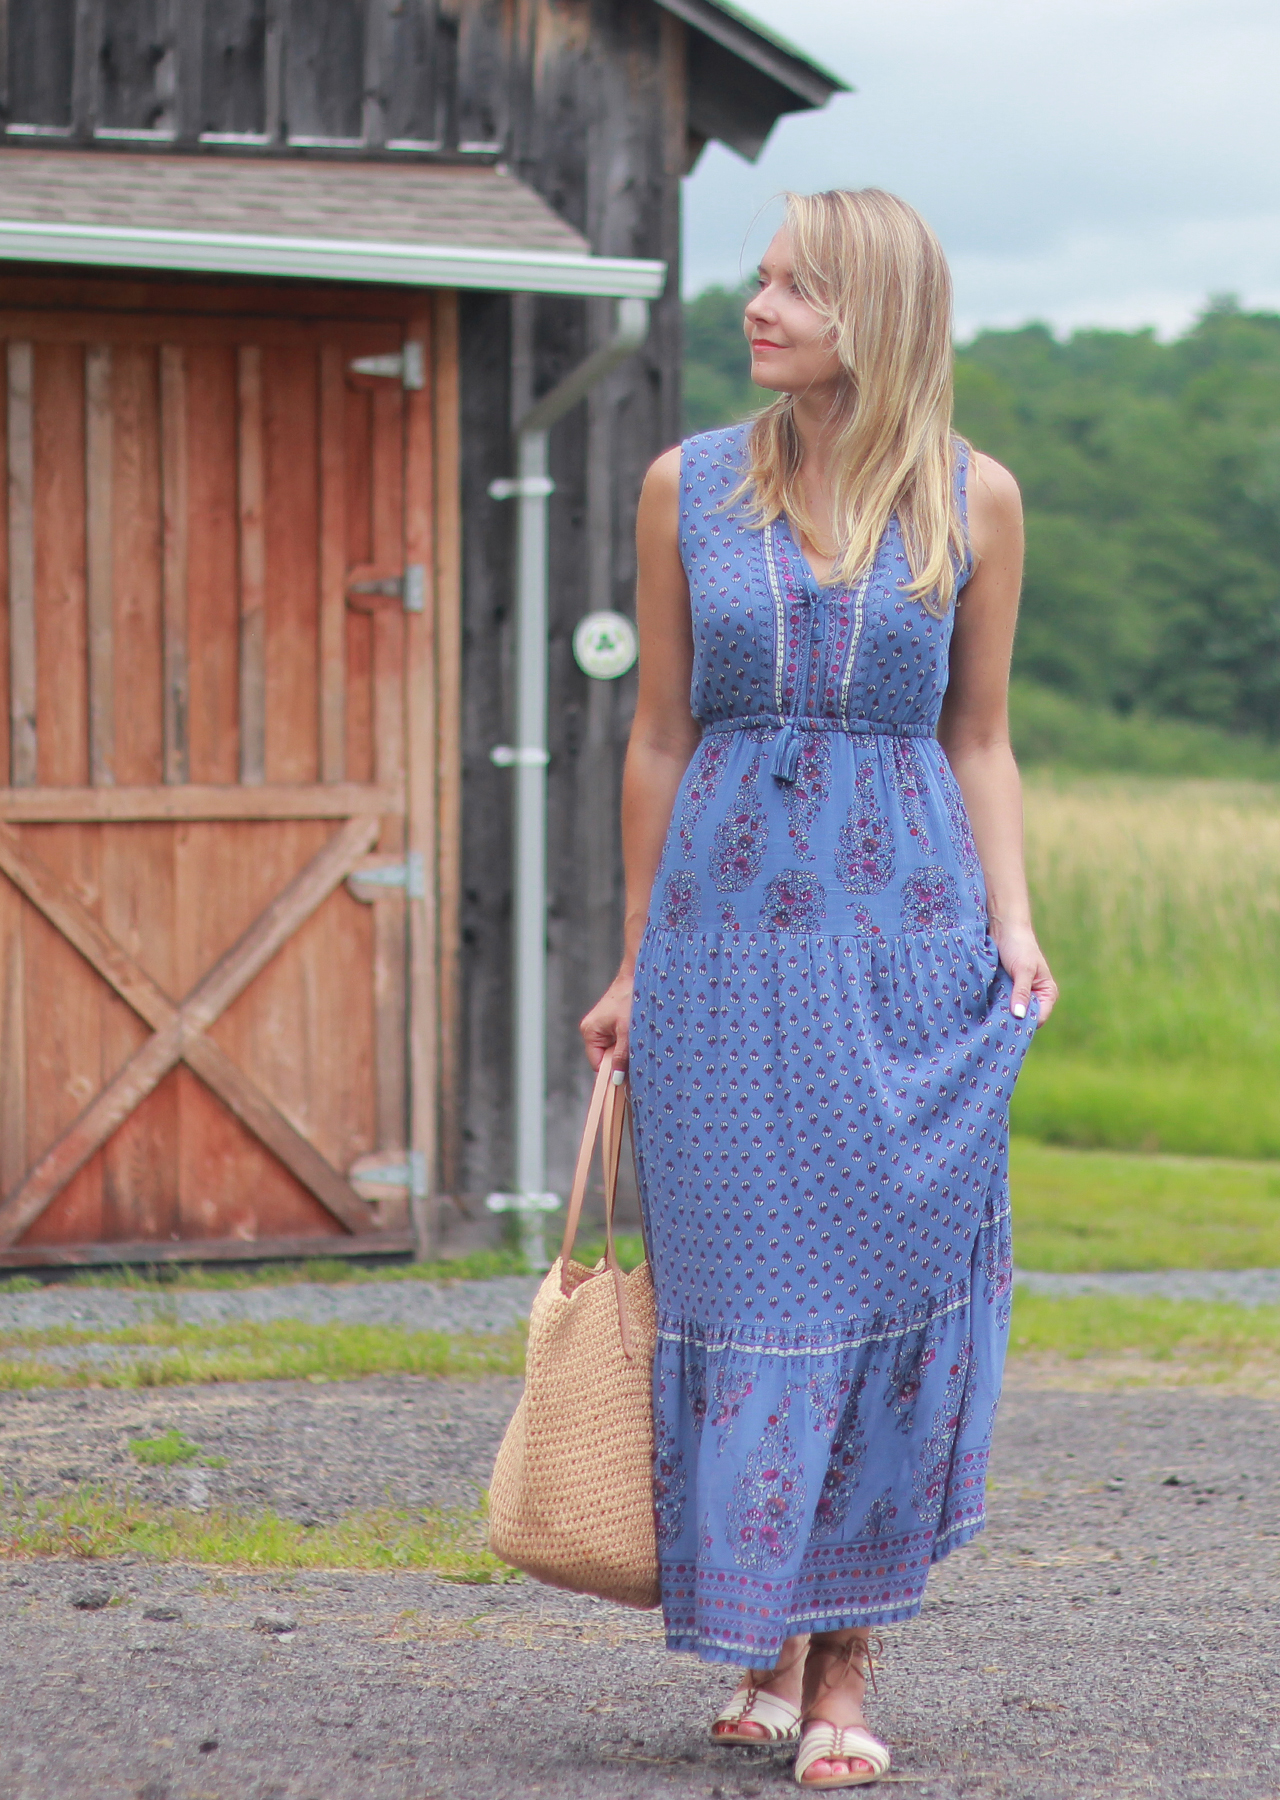 The Steele Maiden: Summer in the Country - Old Navy Floral Maxi Dress and Lace-Up Sandals